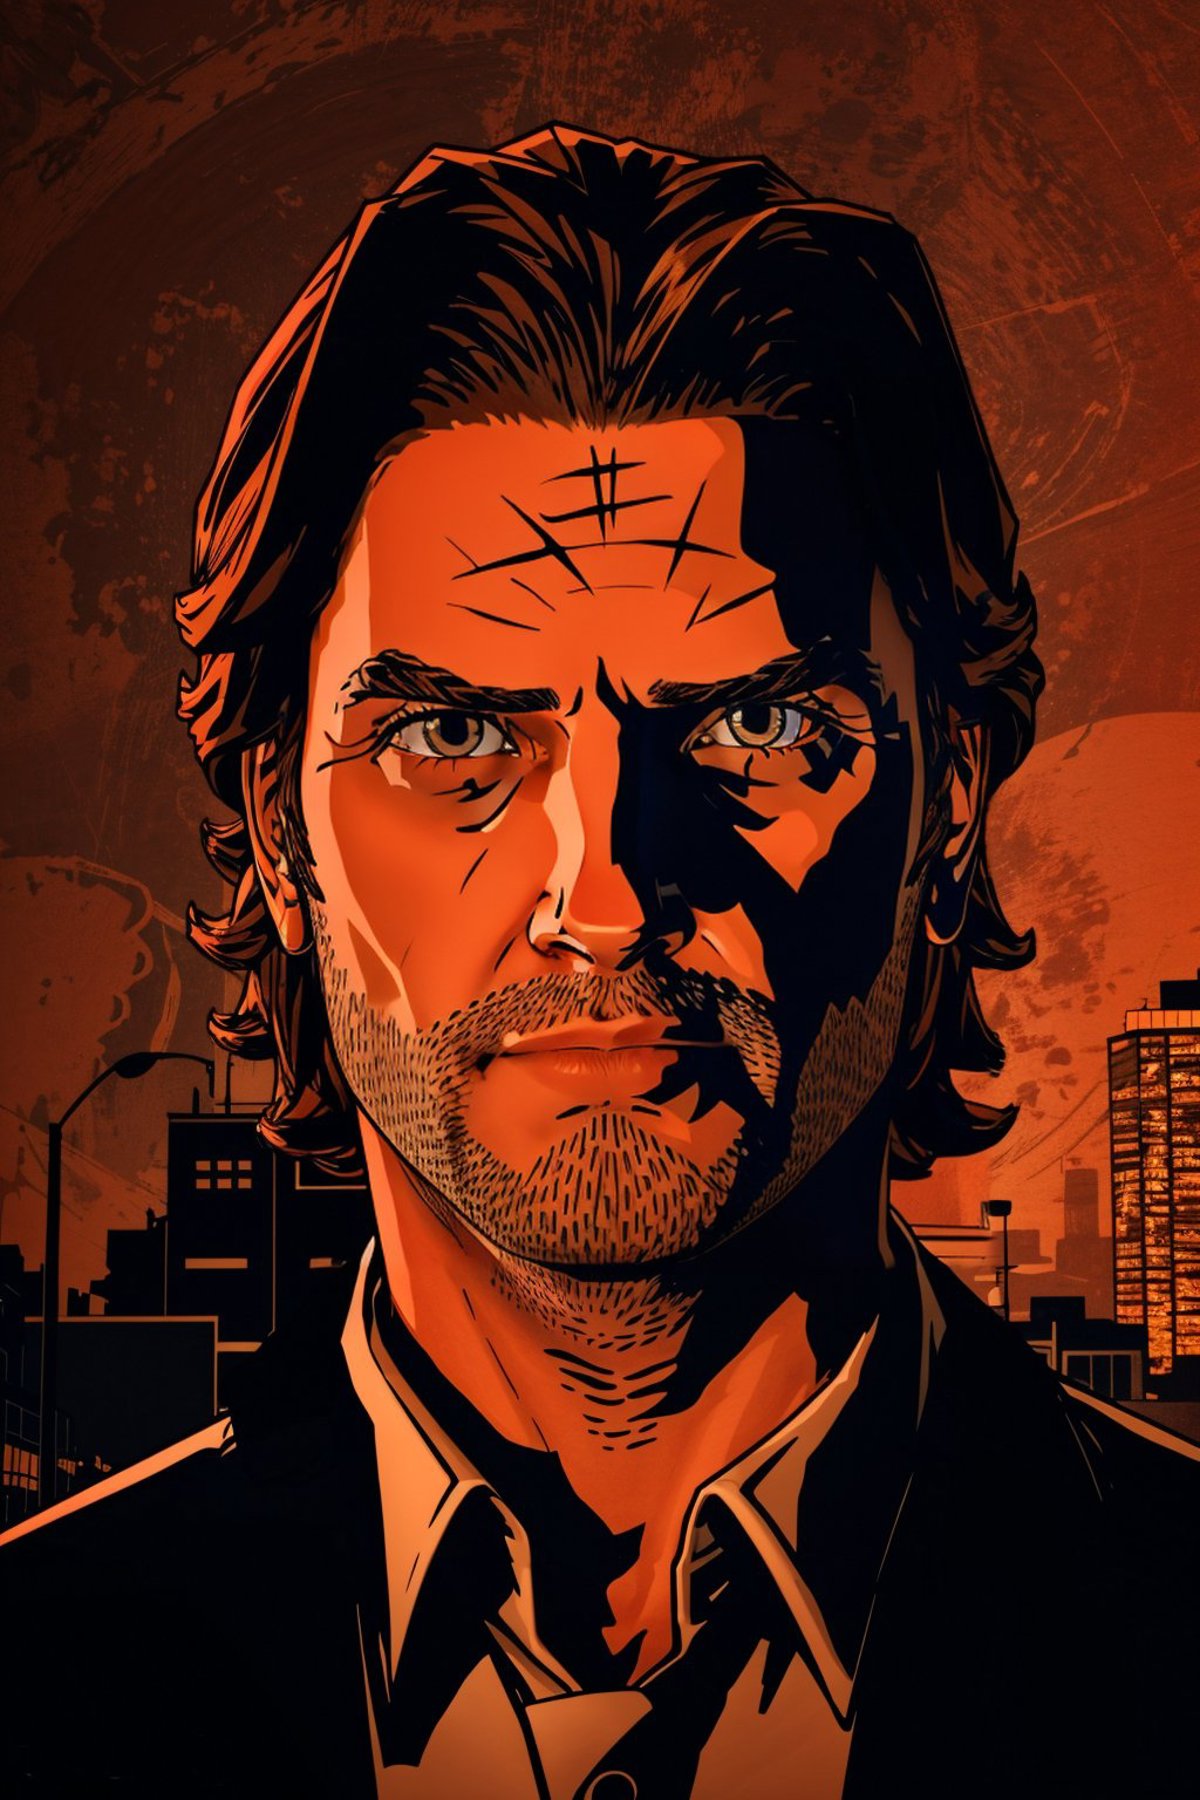 Bigby | The Wolf Among Us / Fables image by soul3142